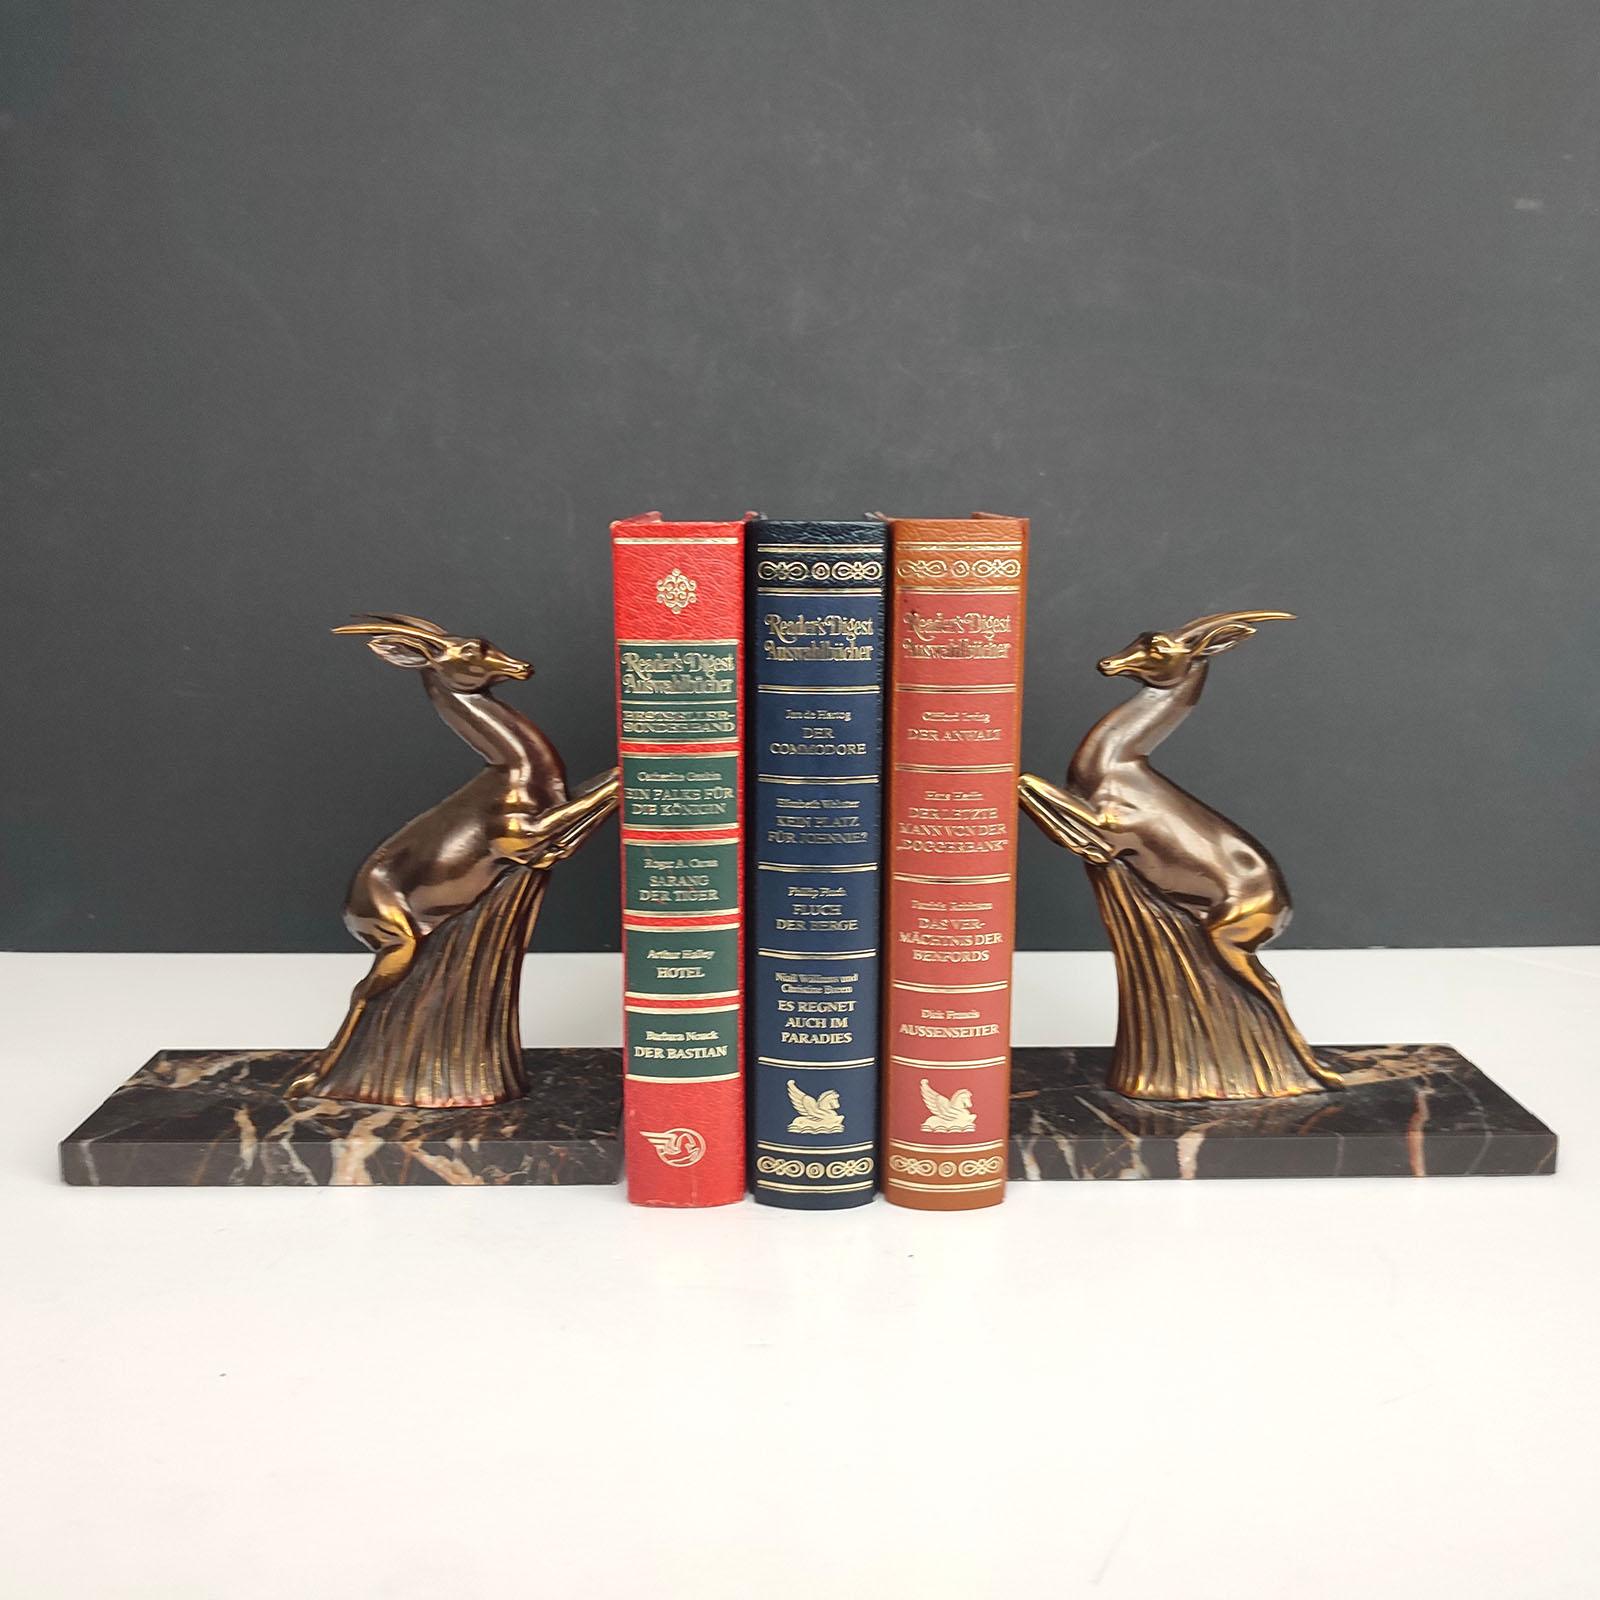 French Art Deco beautiful pair of book ends depicting two antelopes, in a jumping pose, sat on Portoro marble bases.
Highly detailed antelopes, made of spelter, finished in a bronzed - burnished copper patina.
Rich marble bases having a lovely